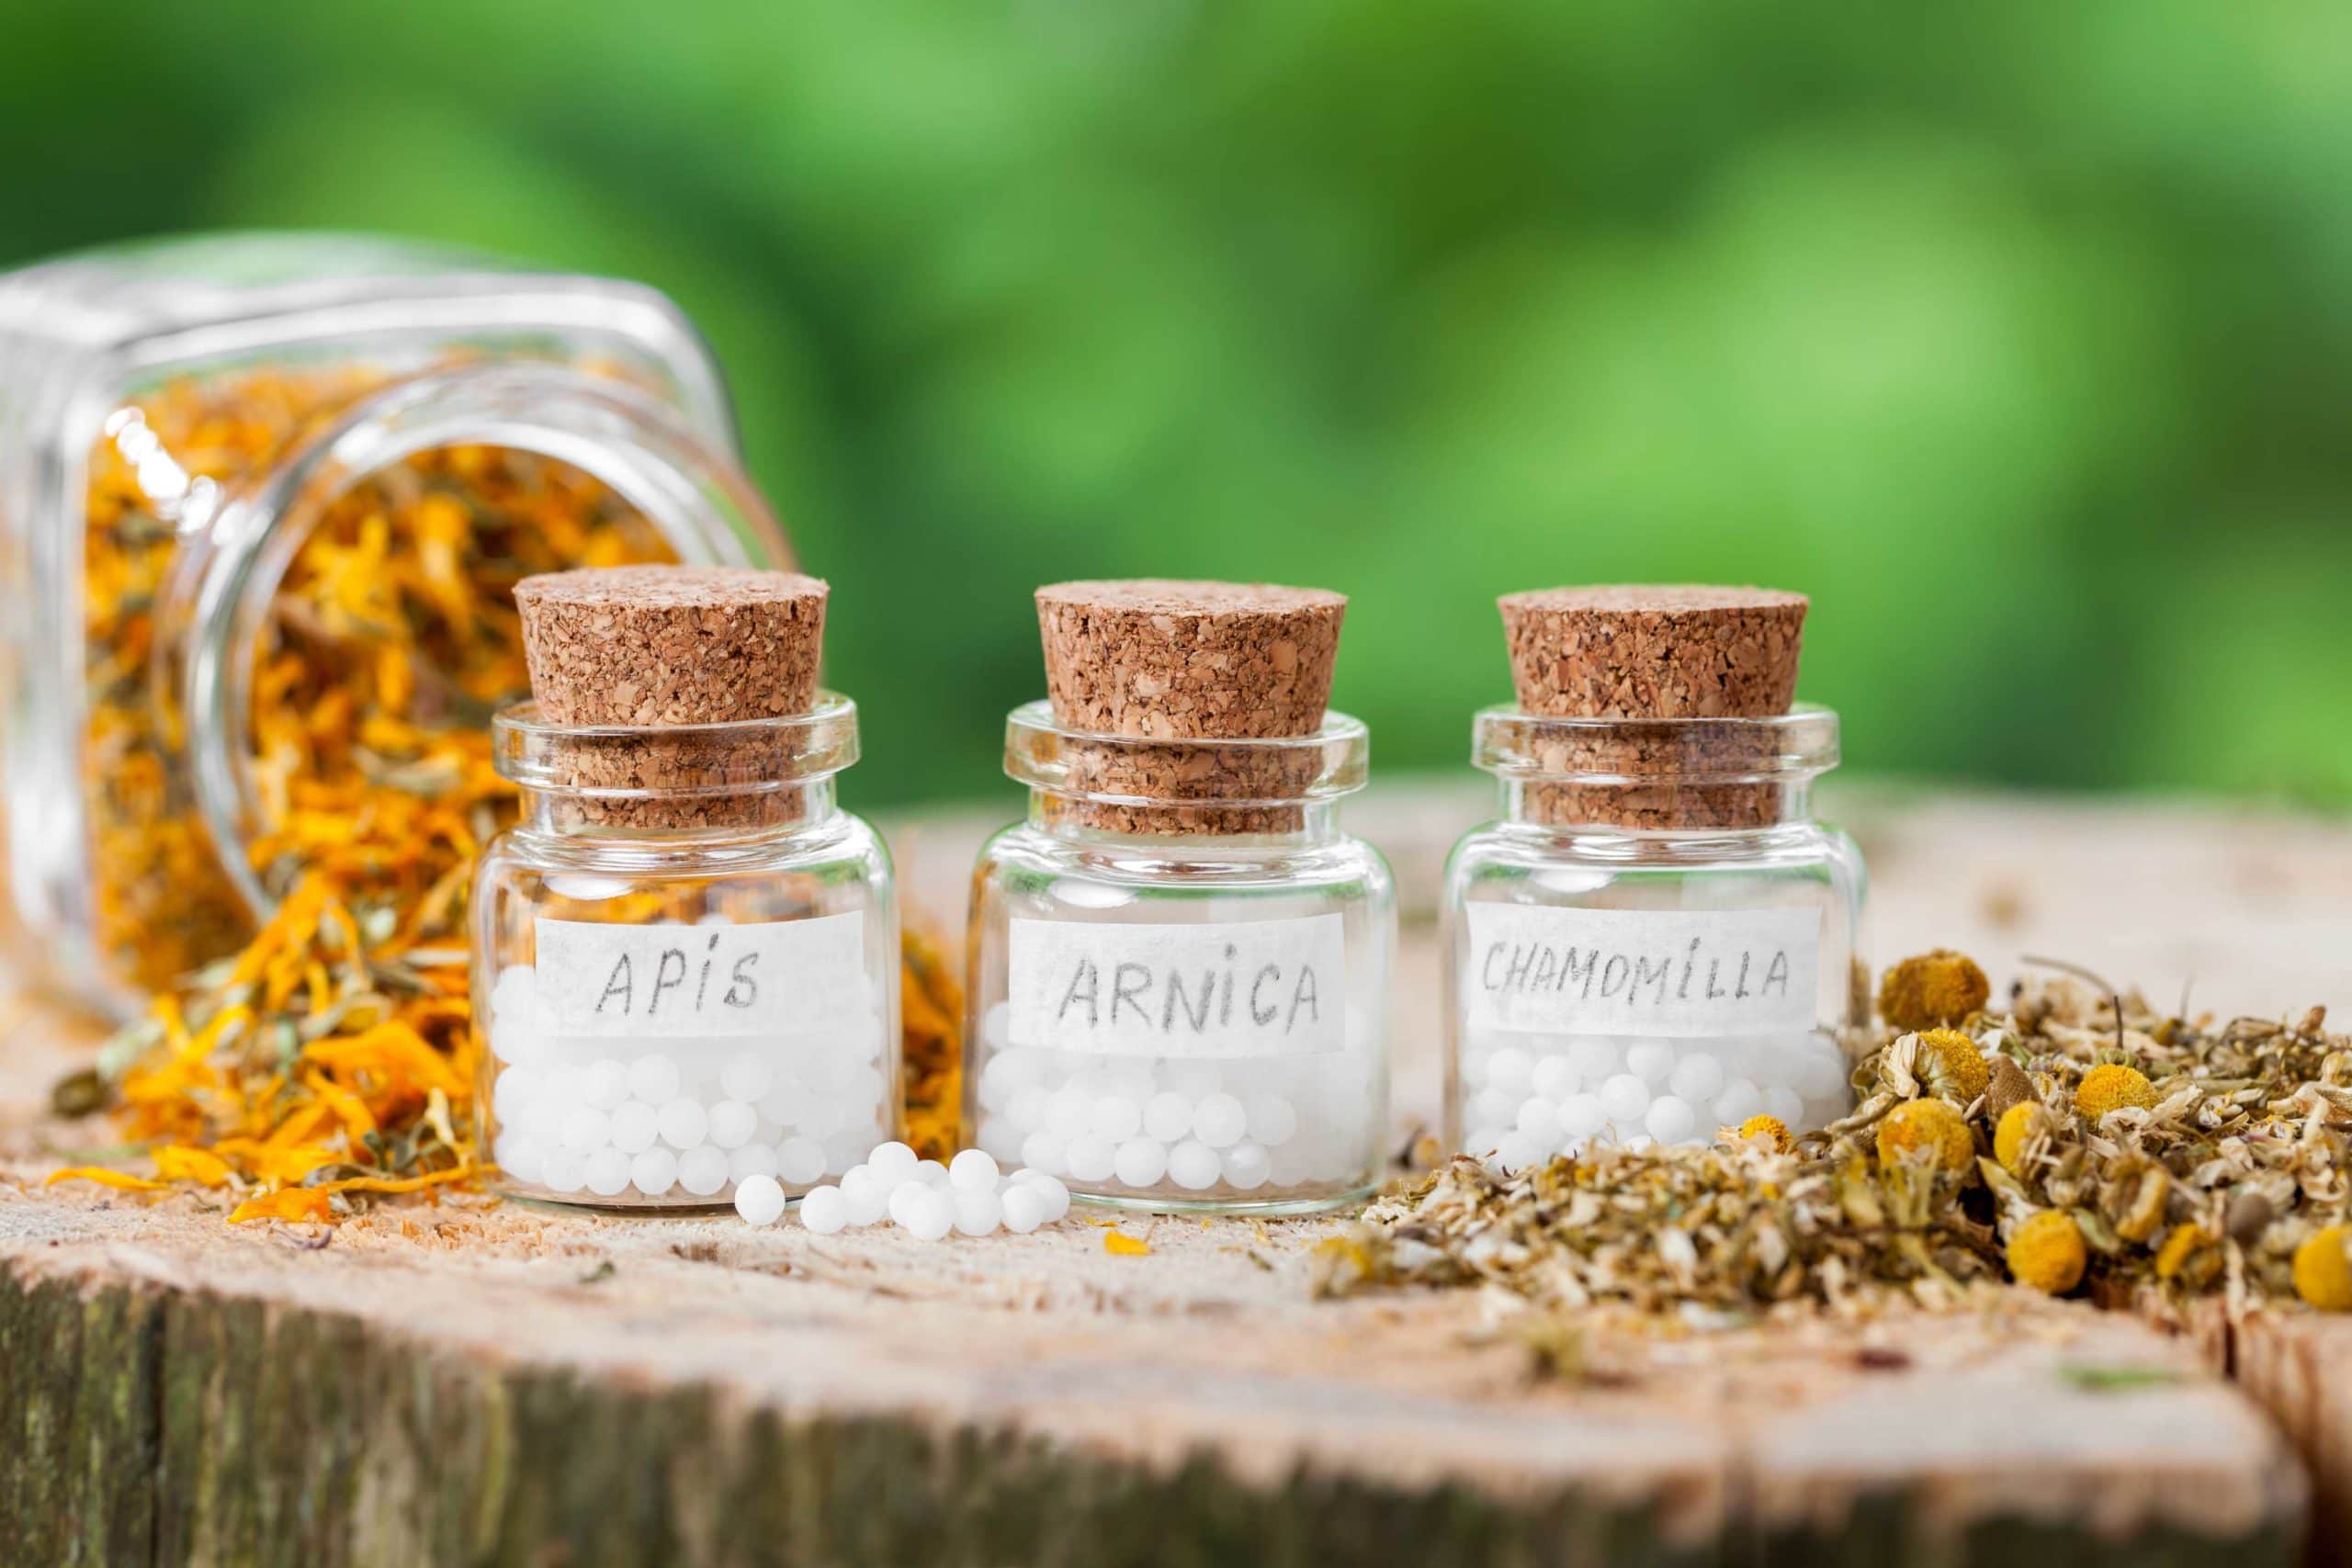 old fashioned homeopathic remedy bottles